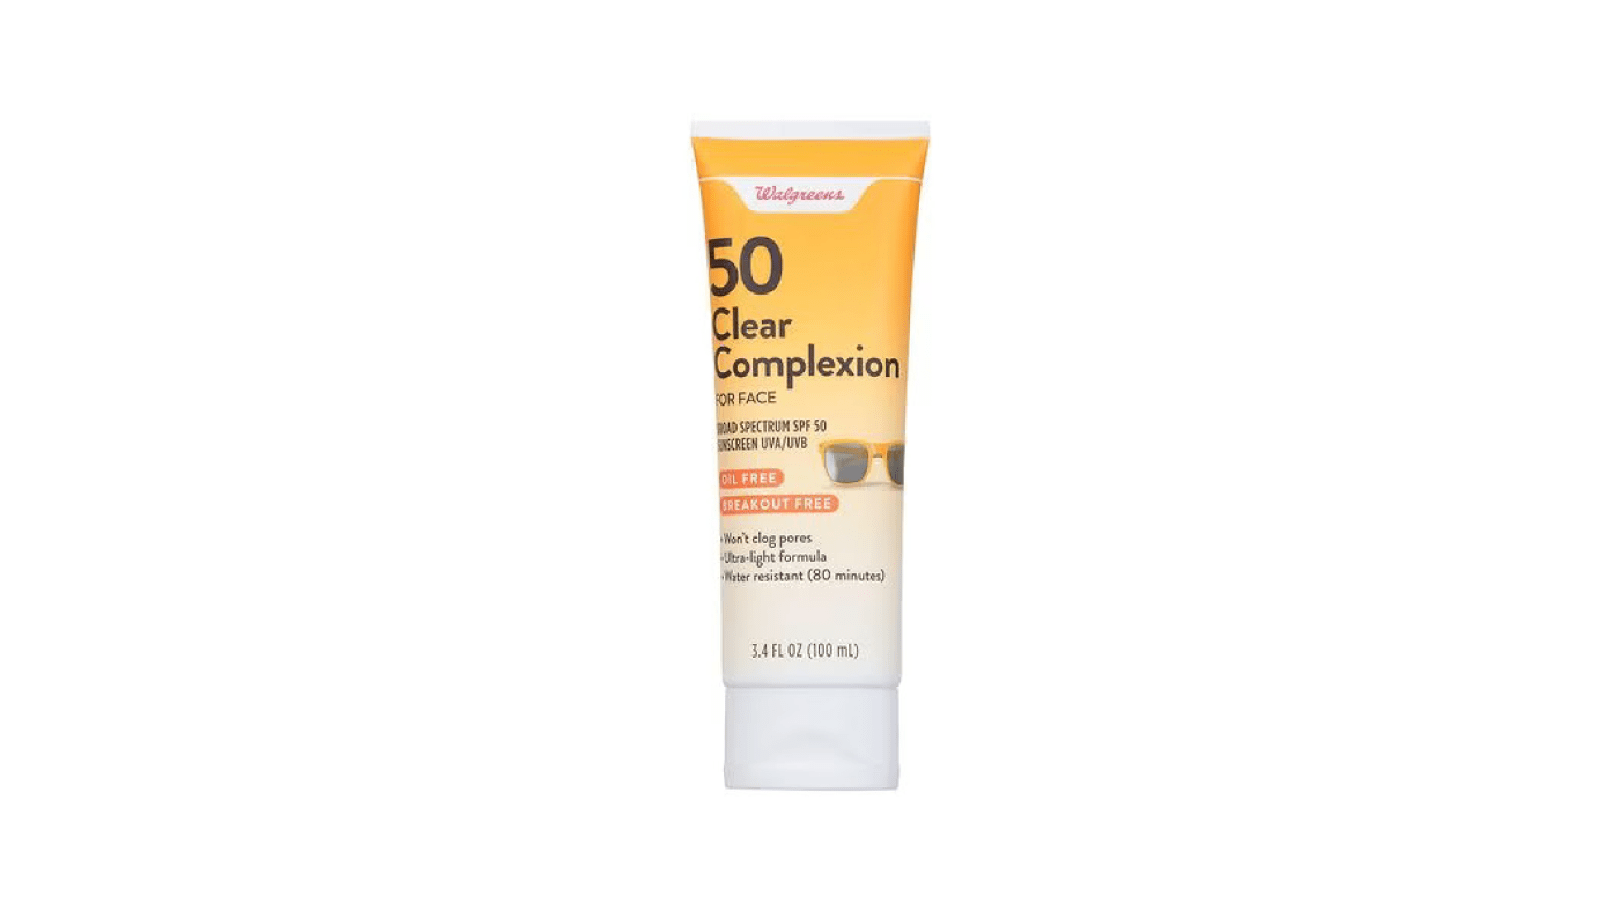 Clear Complexion Sunscreen 